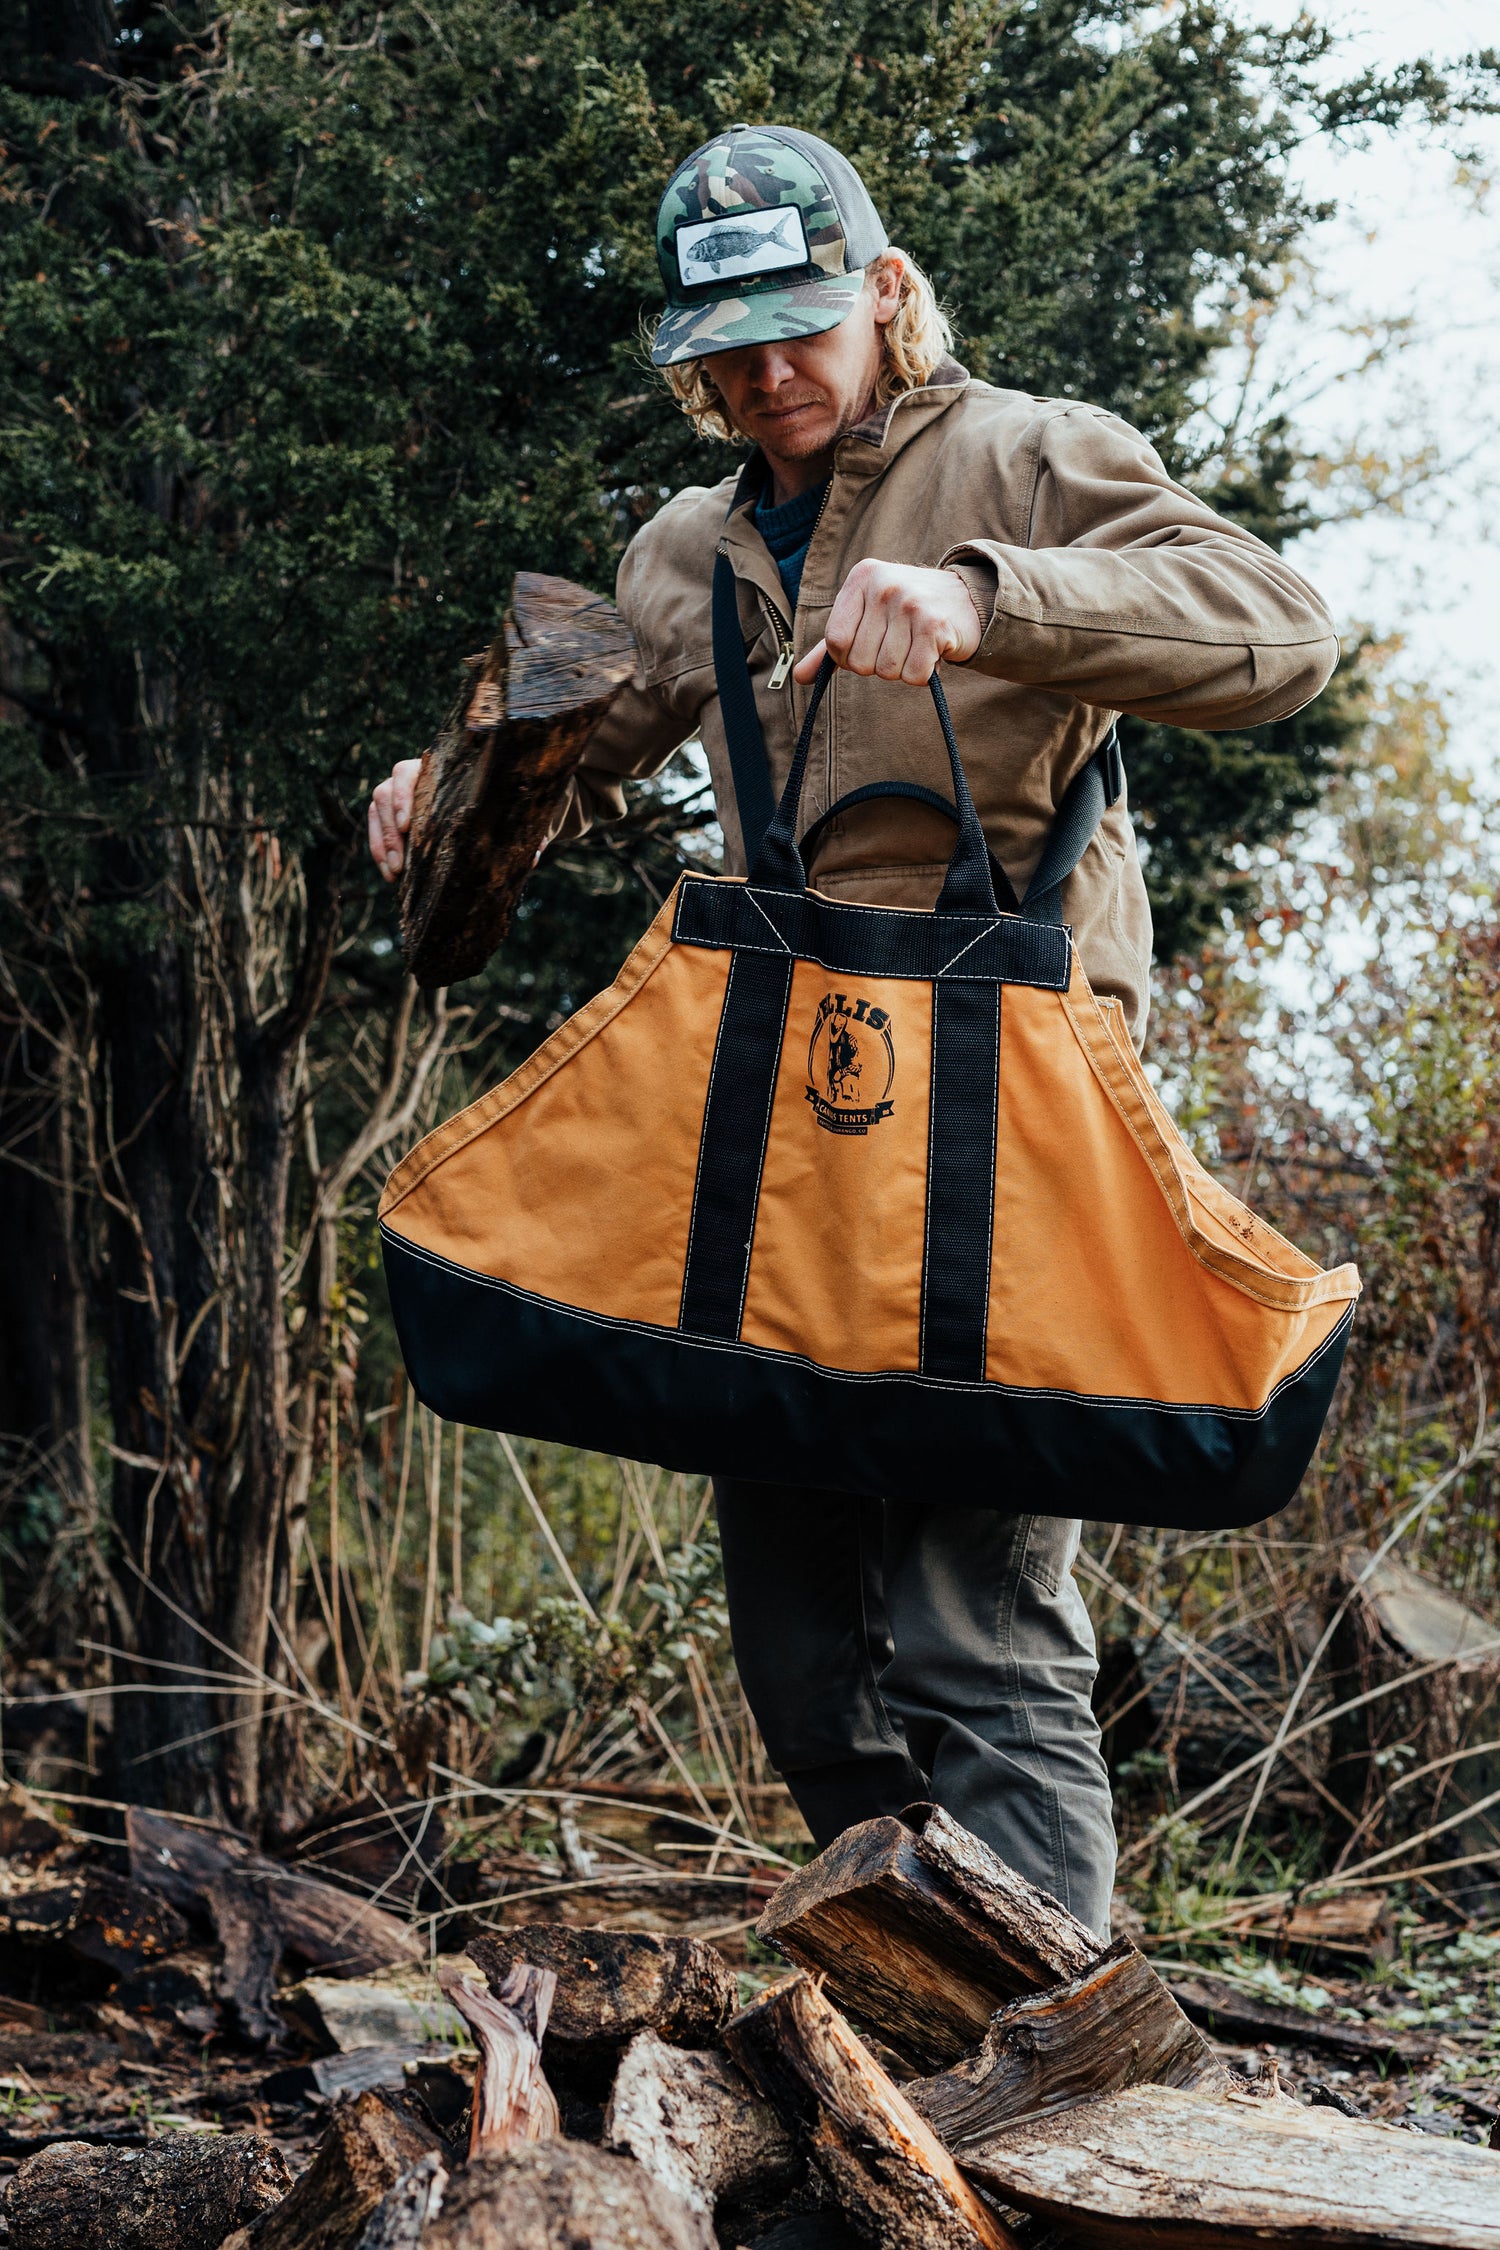 Ergonomically Designed wood carrier, made from premium materials in the USA